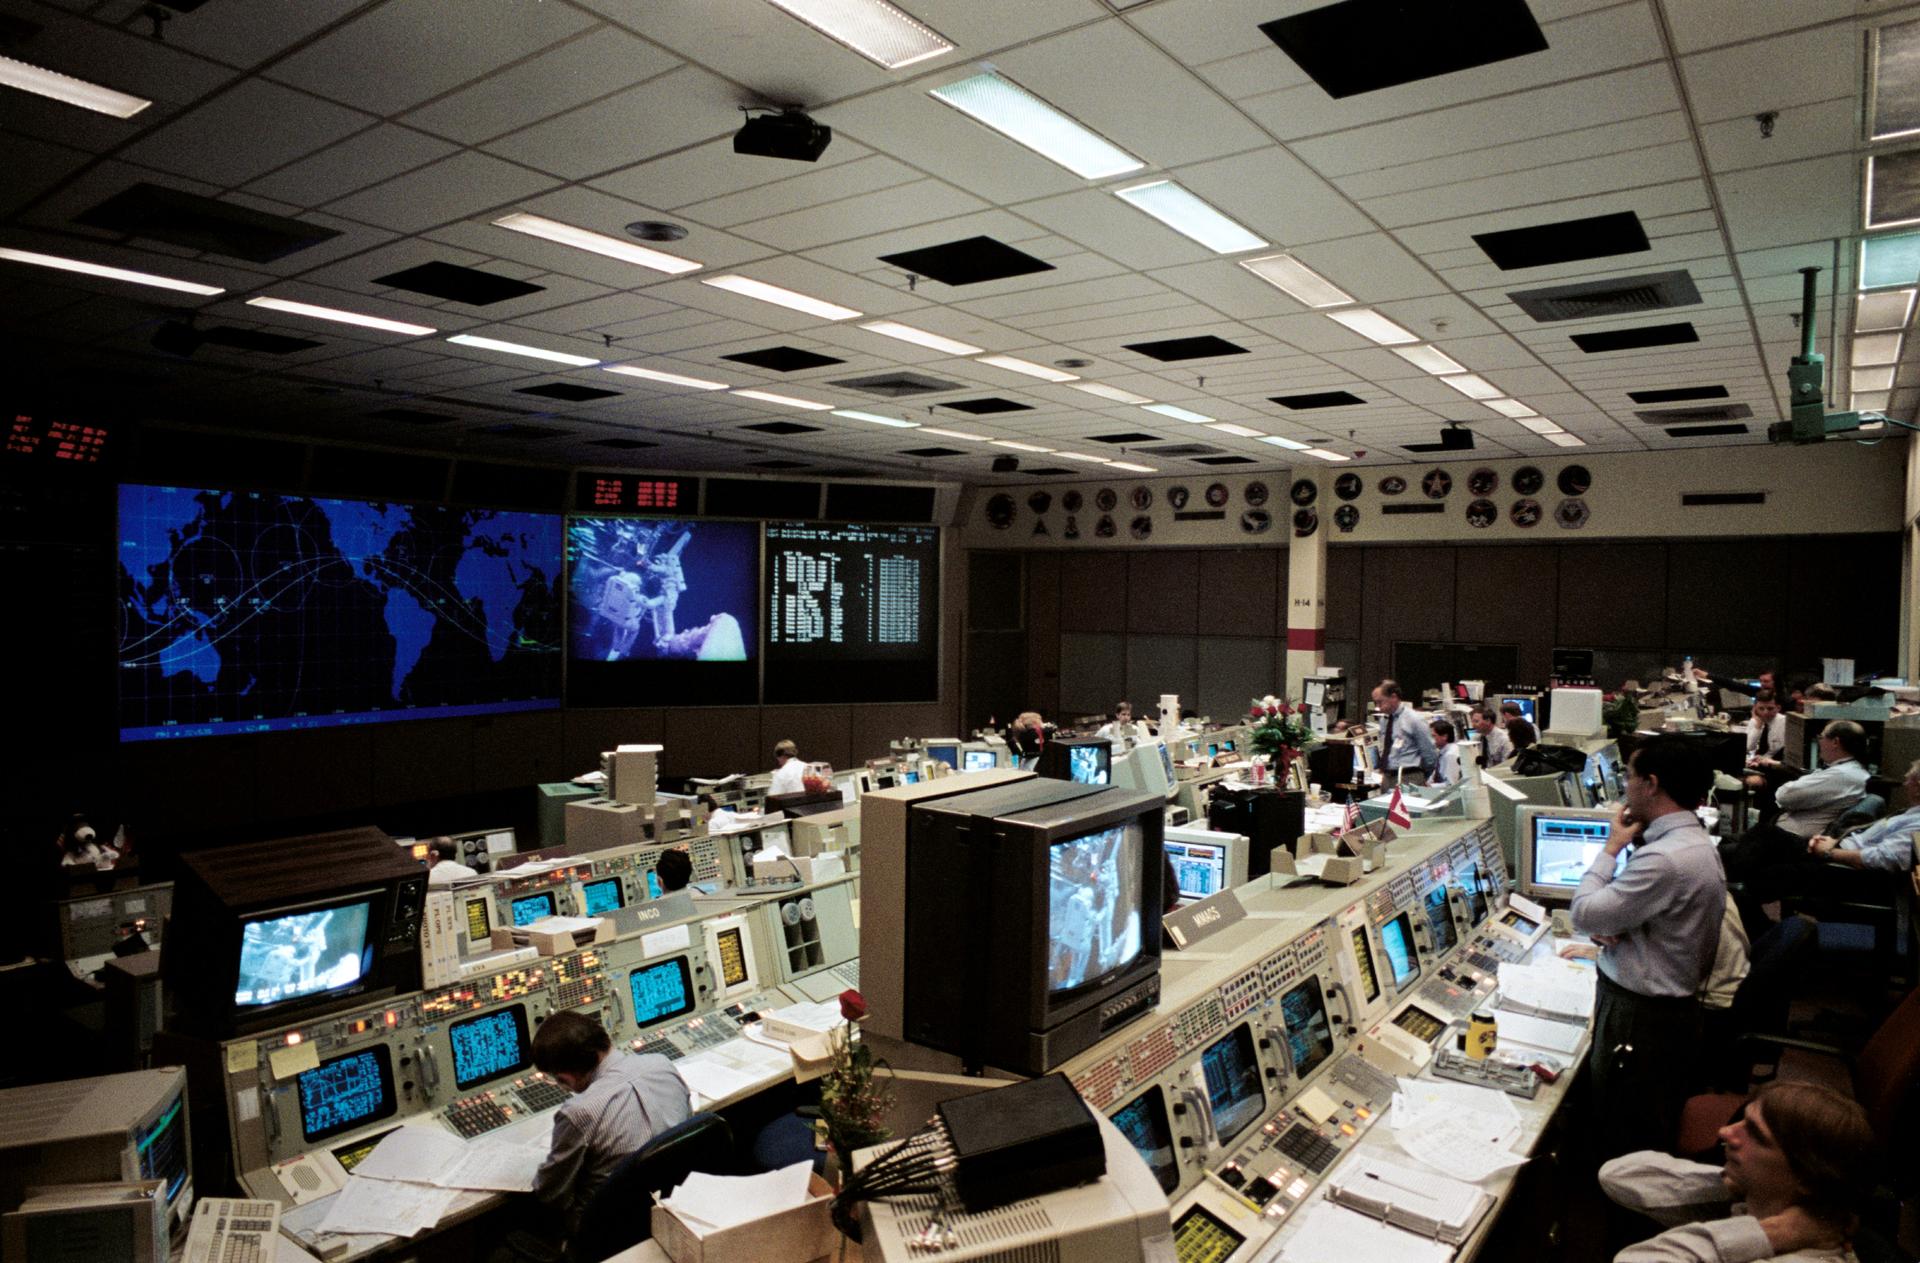 The mission control room at Johnson Space Center is shown with flight controllers watching a Servicing Mission 1 spacewalk.